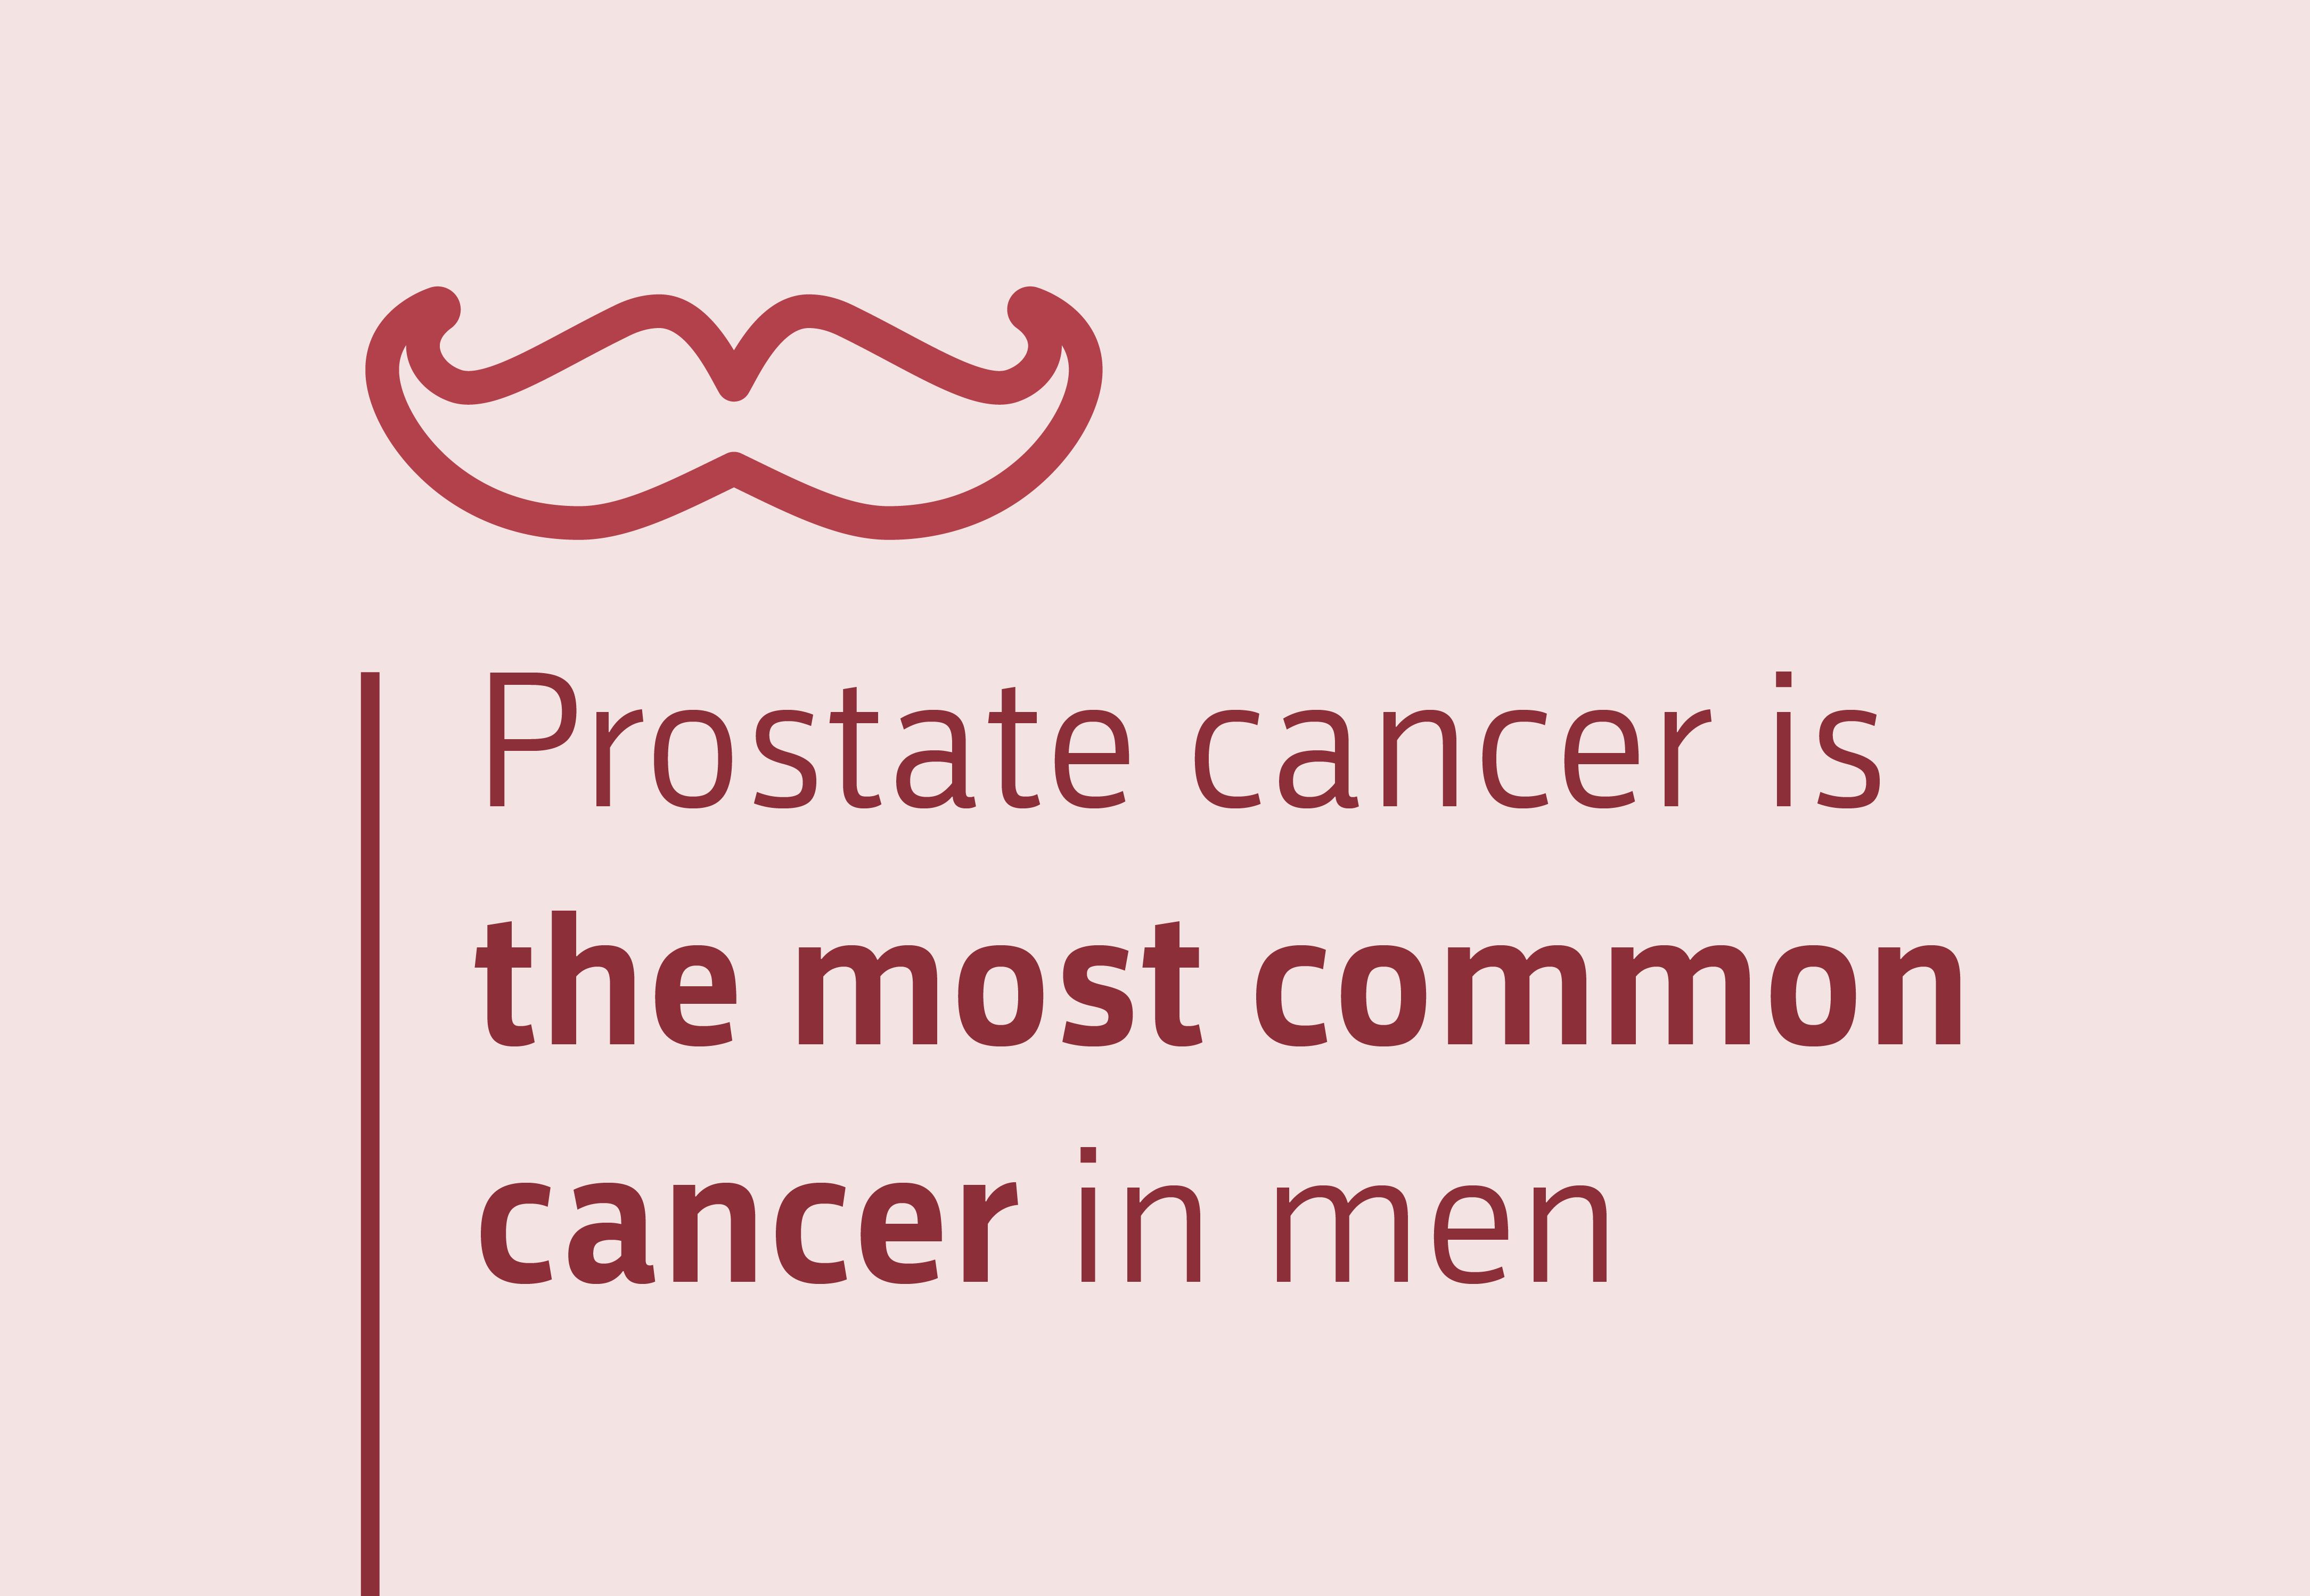 Prostate cancer is the most common cancer in men